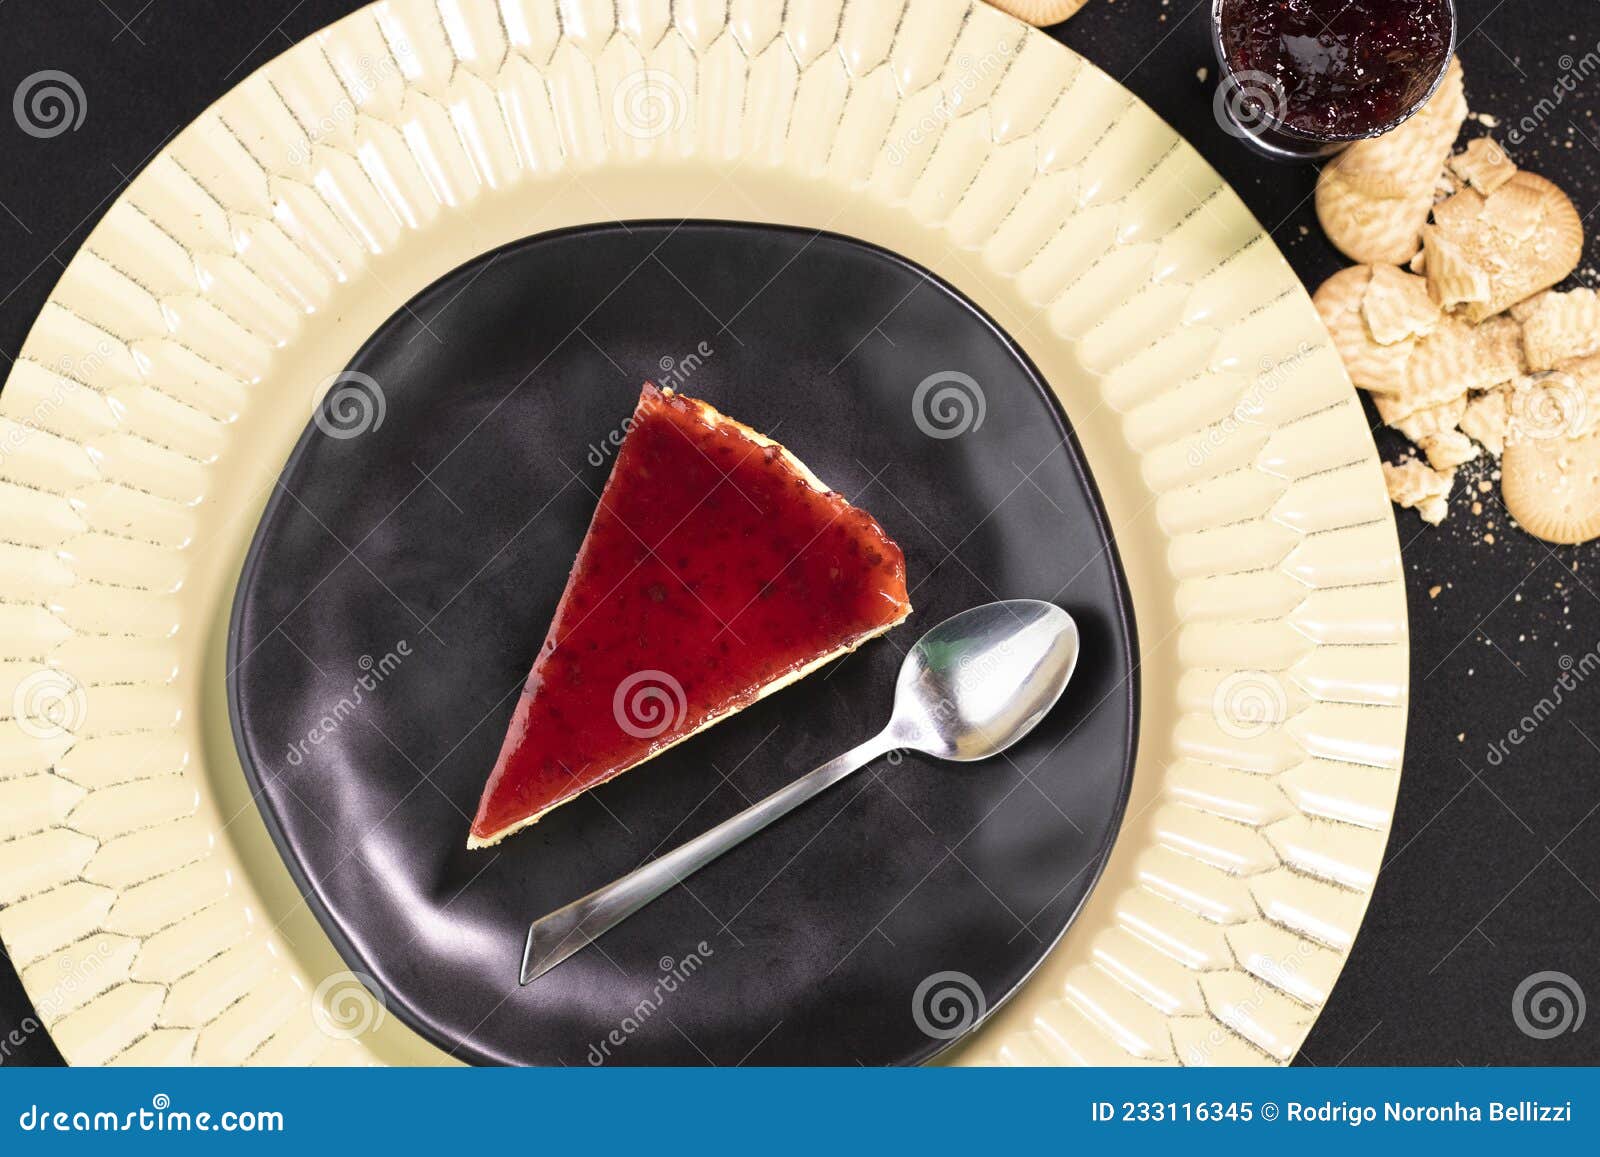 red fruits cheesecake frutas on a black plate